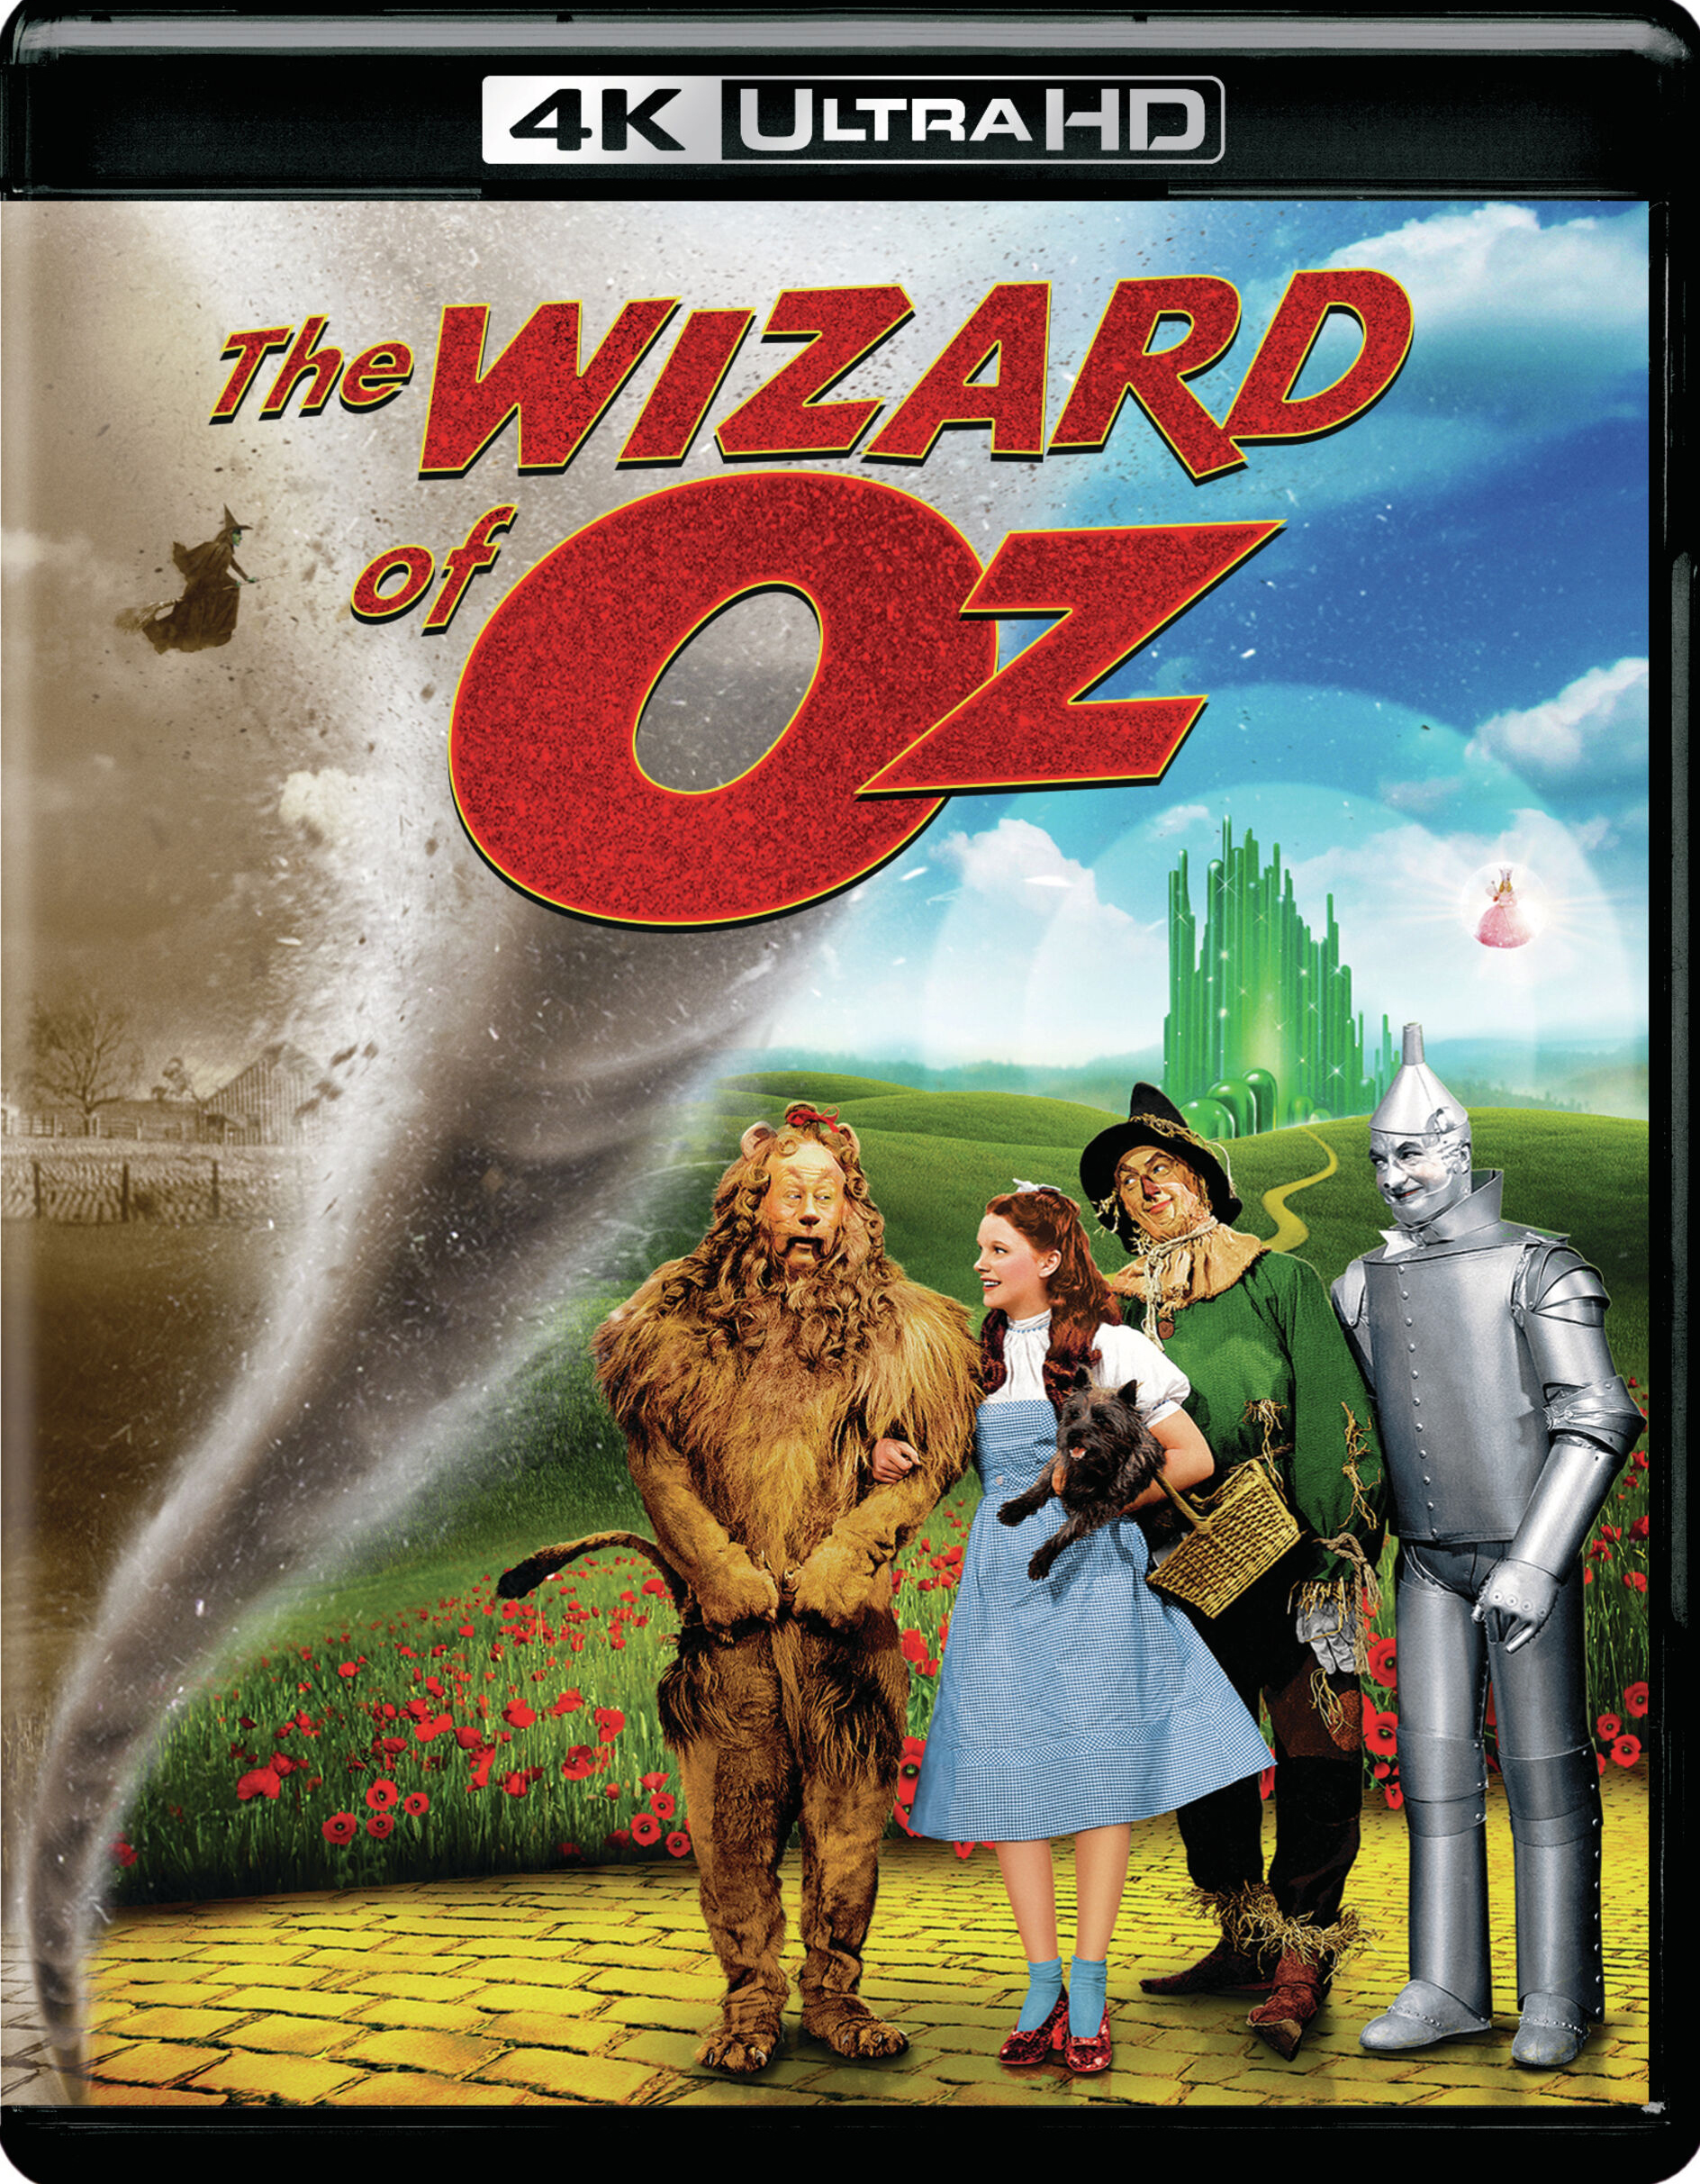 wizard of oz poster ideas